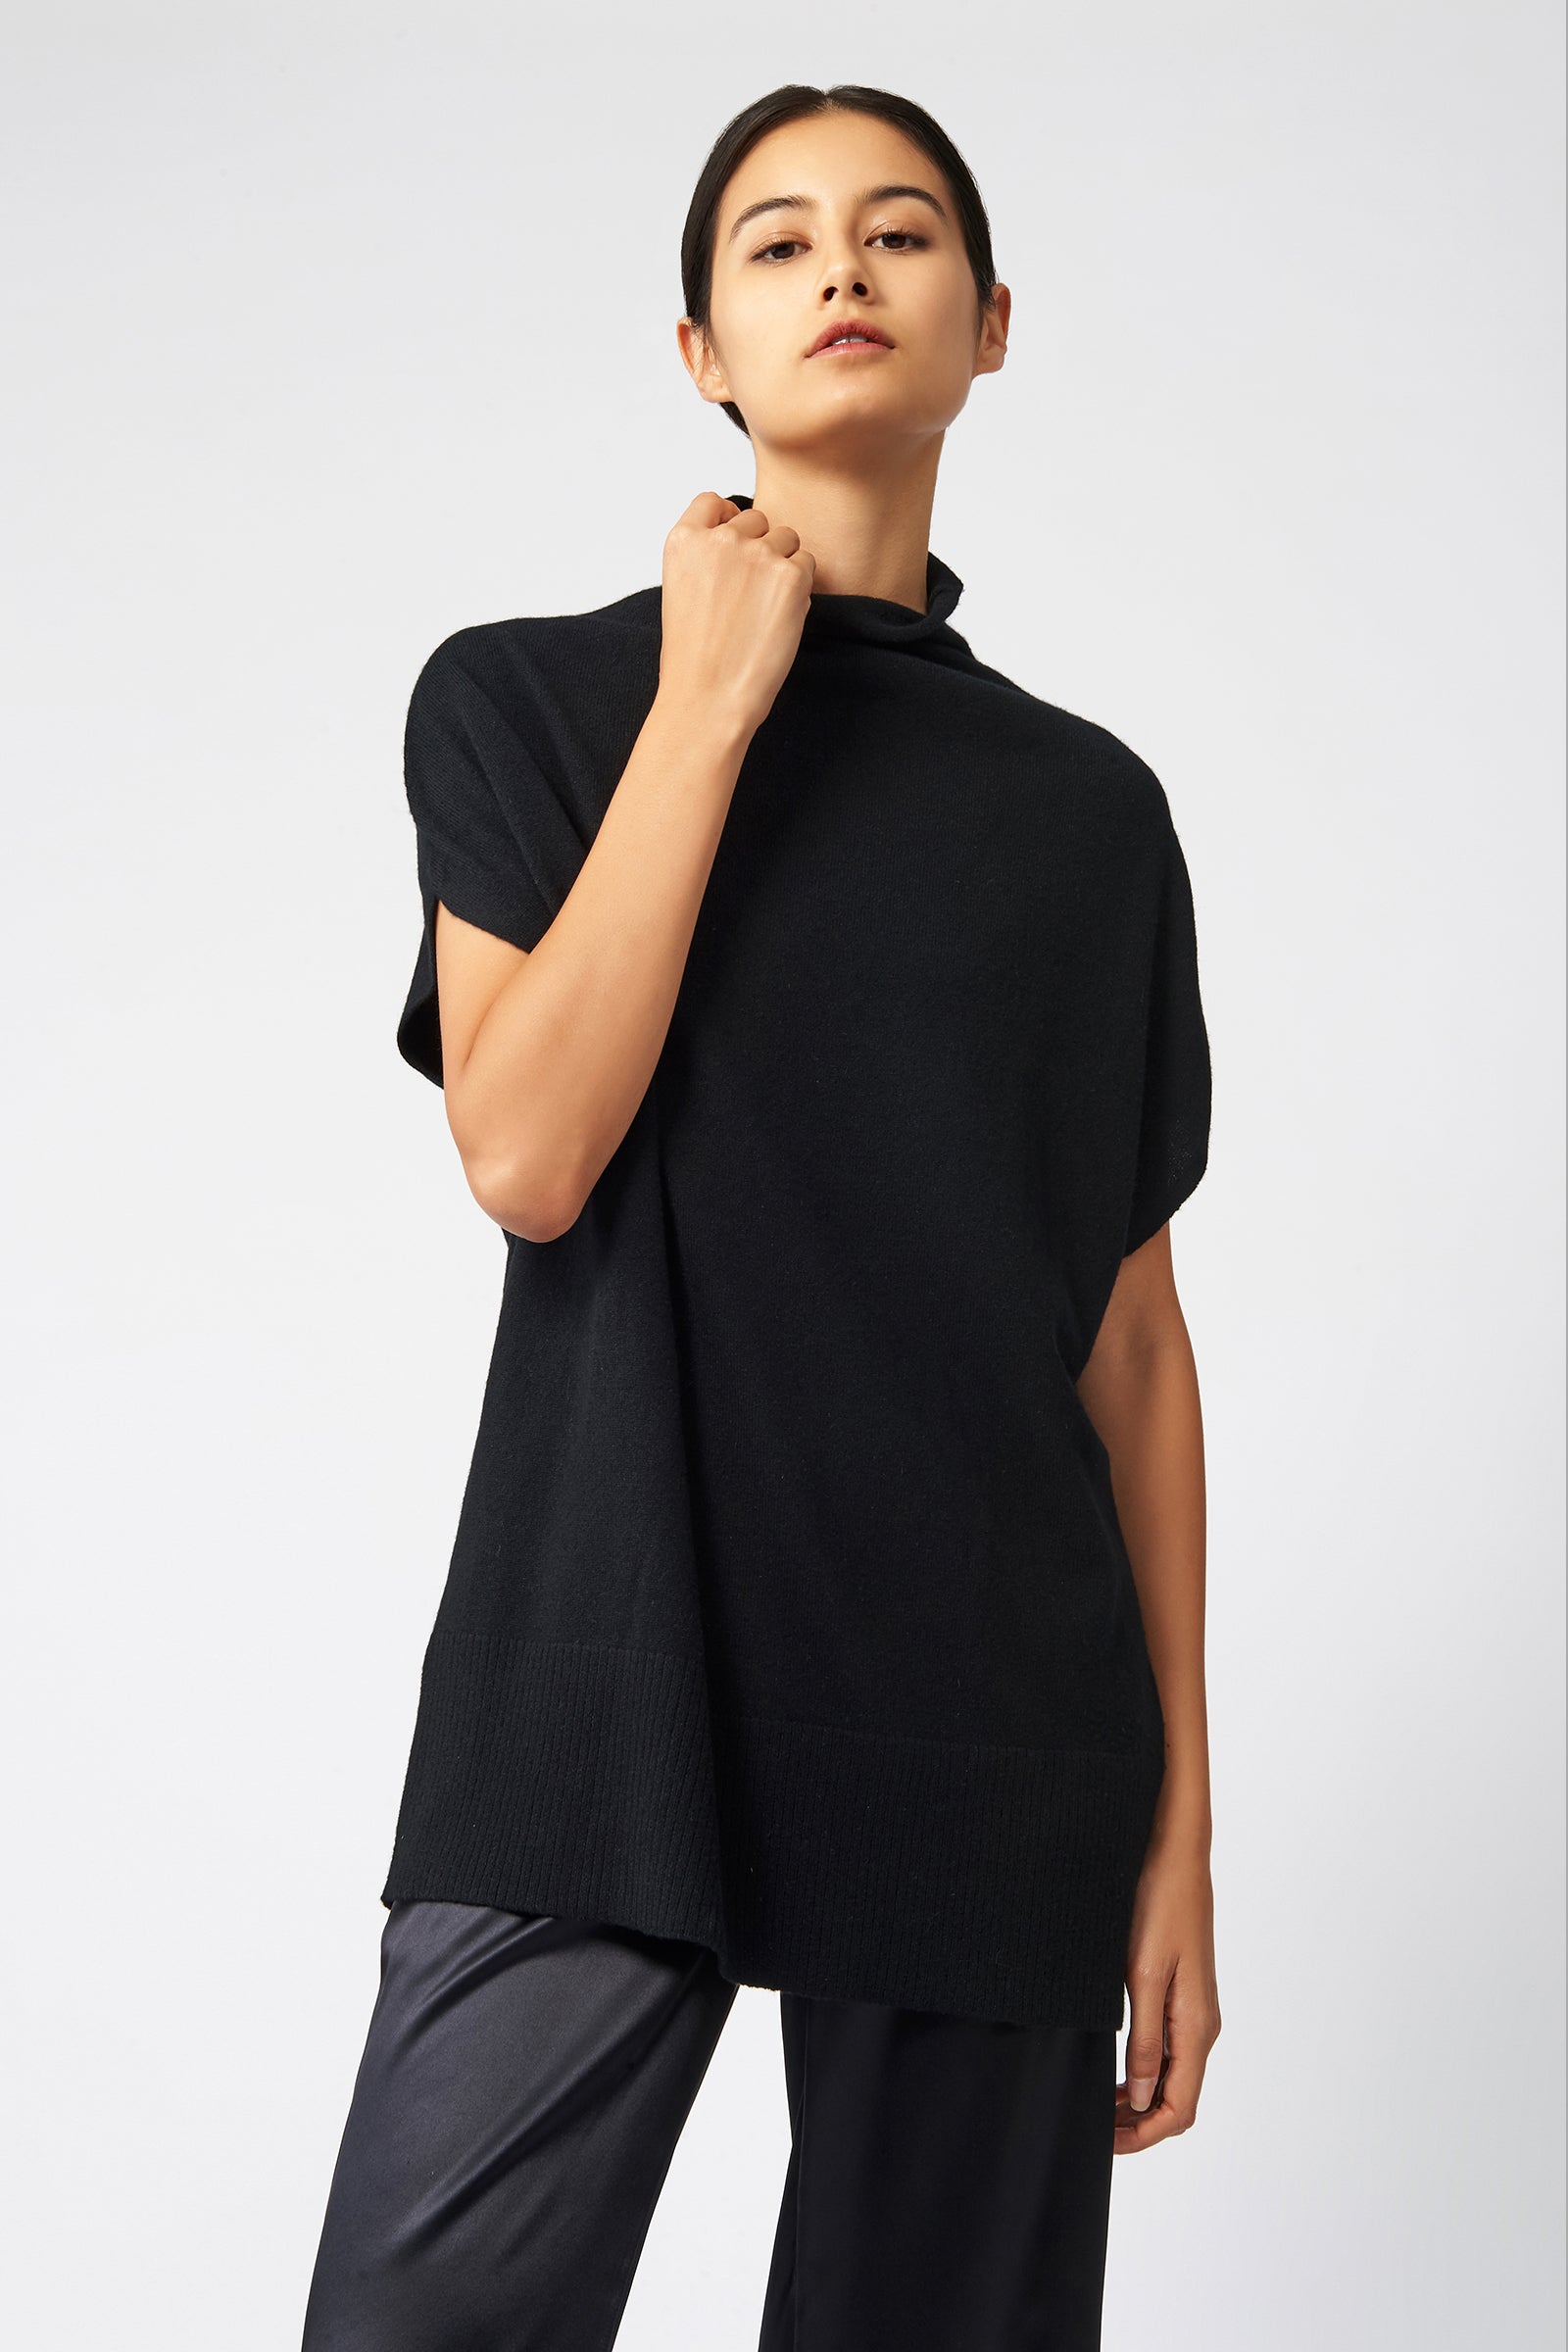 Cashmere Funnelneck in Black Made From 100% Cashmere – KAL RIEMAN